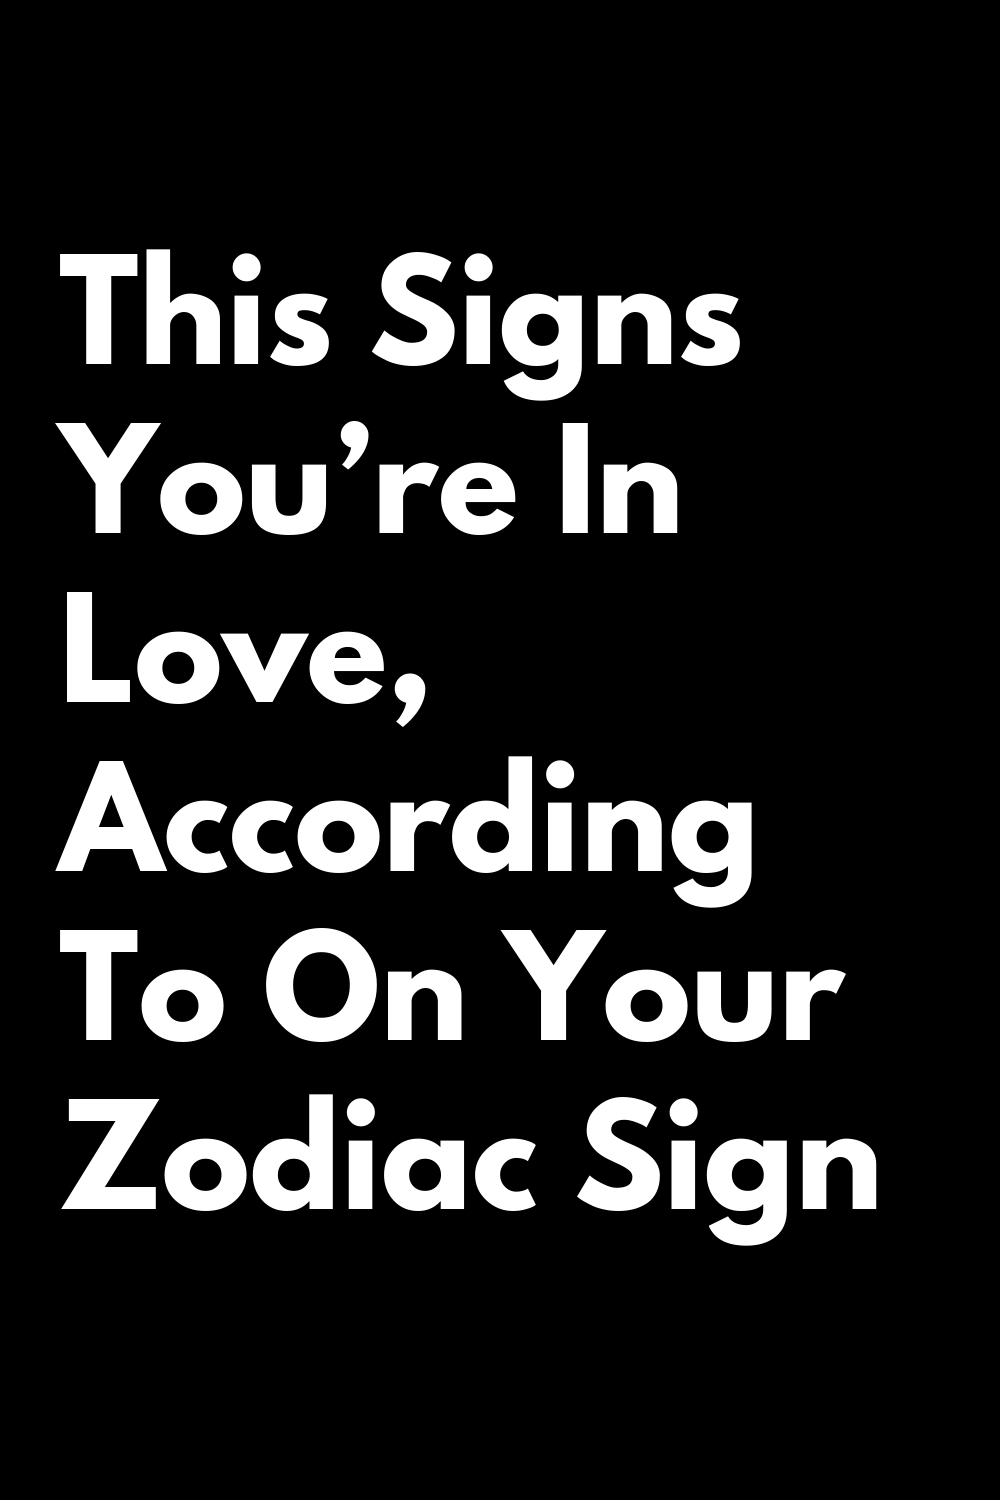 This Signs You’re In Love, According To On Your Zodiac Sign | zodiac Signs